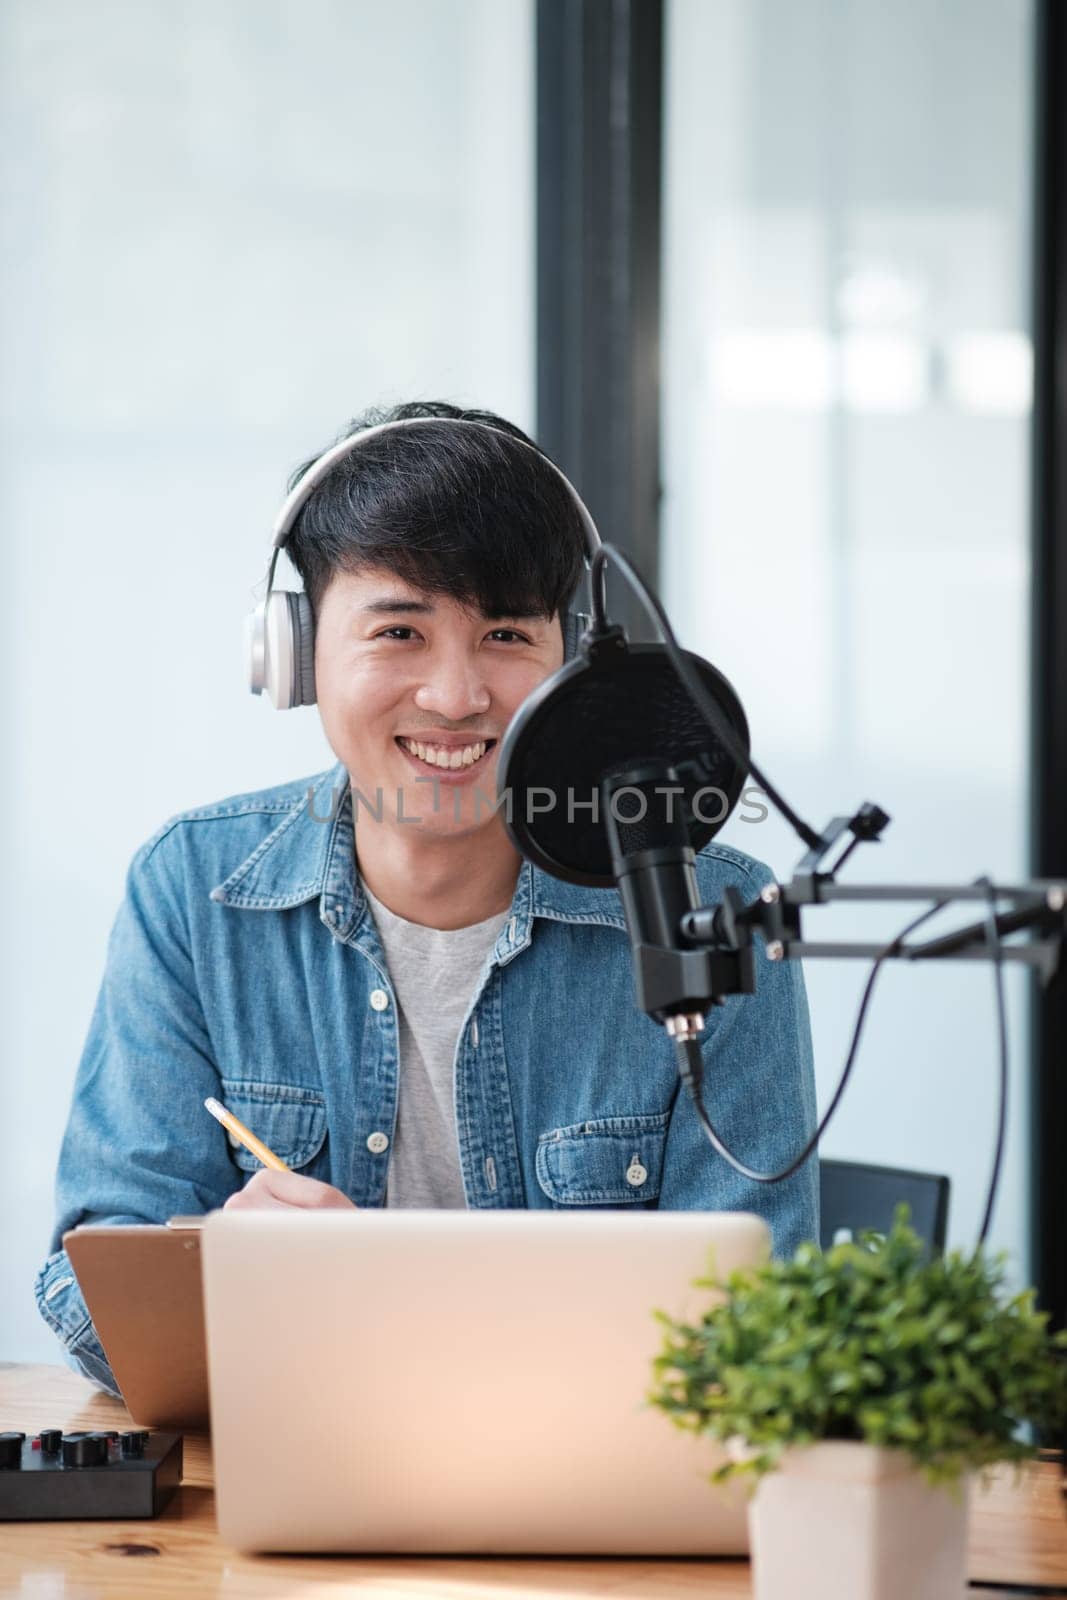 A man wearing headphones is sitting at a desk with a laptop and a plant. He is smiling and he is enjoying himself